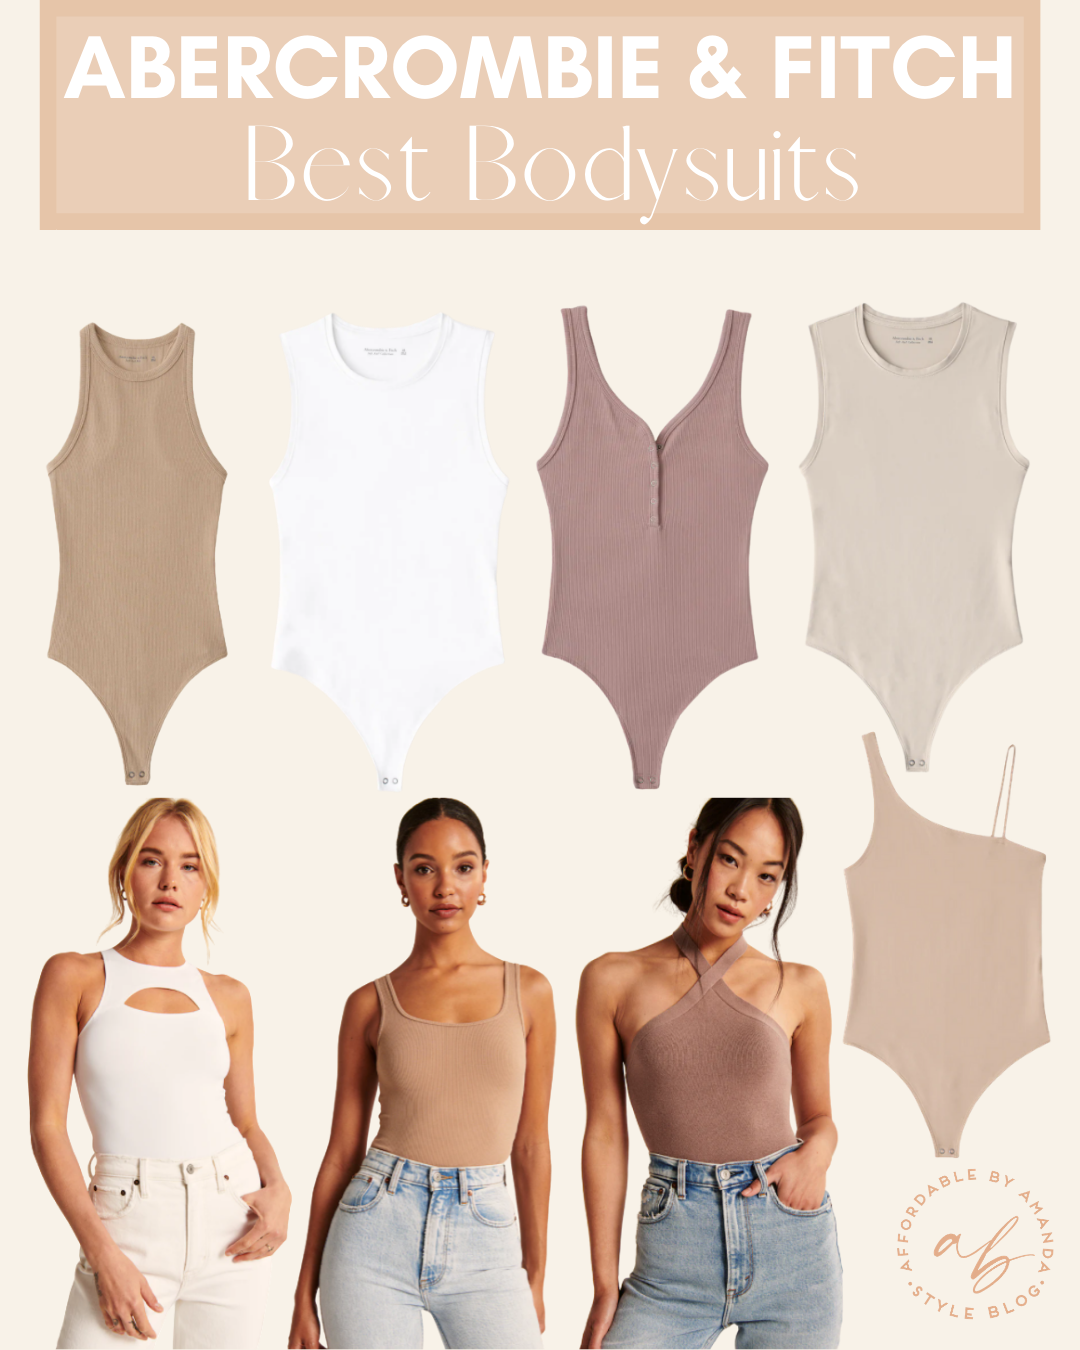 How to Style the Best Bodysuits for Summer - Abercrombie & Fitch Best Bodysuits - Affordable by Amanda